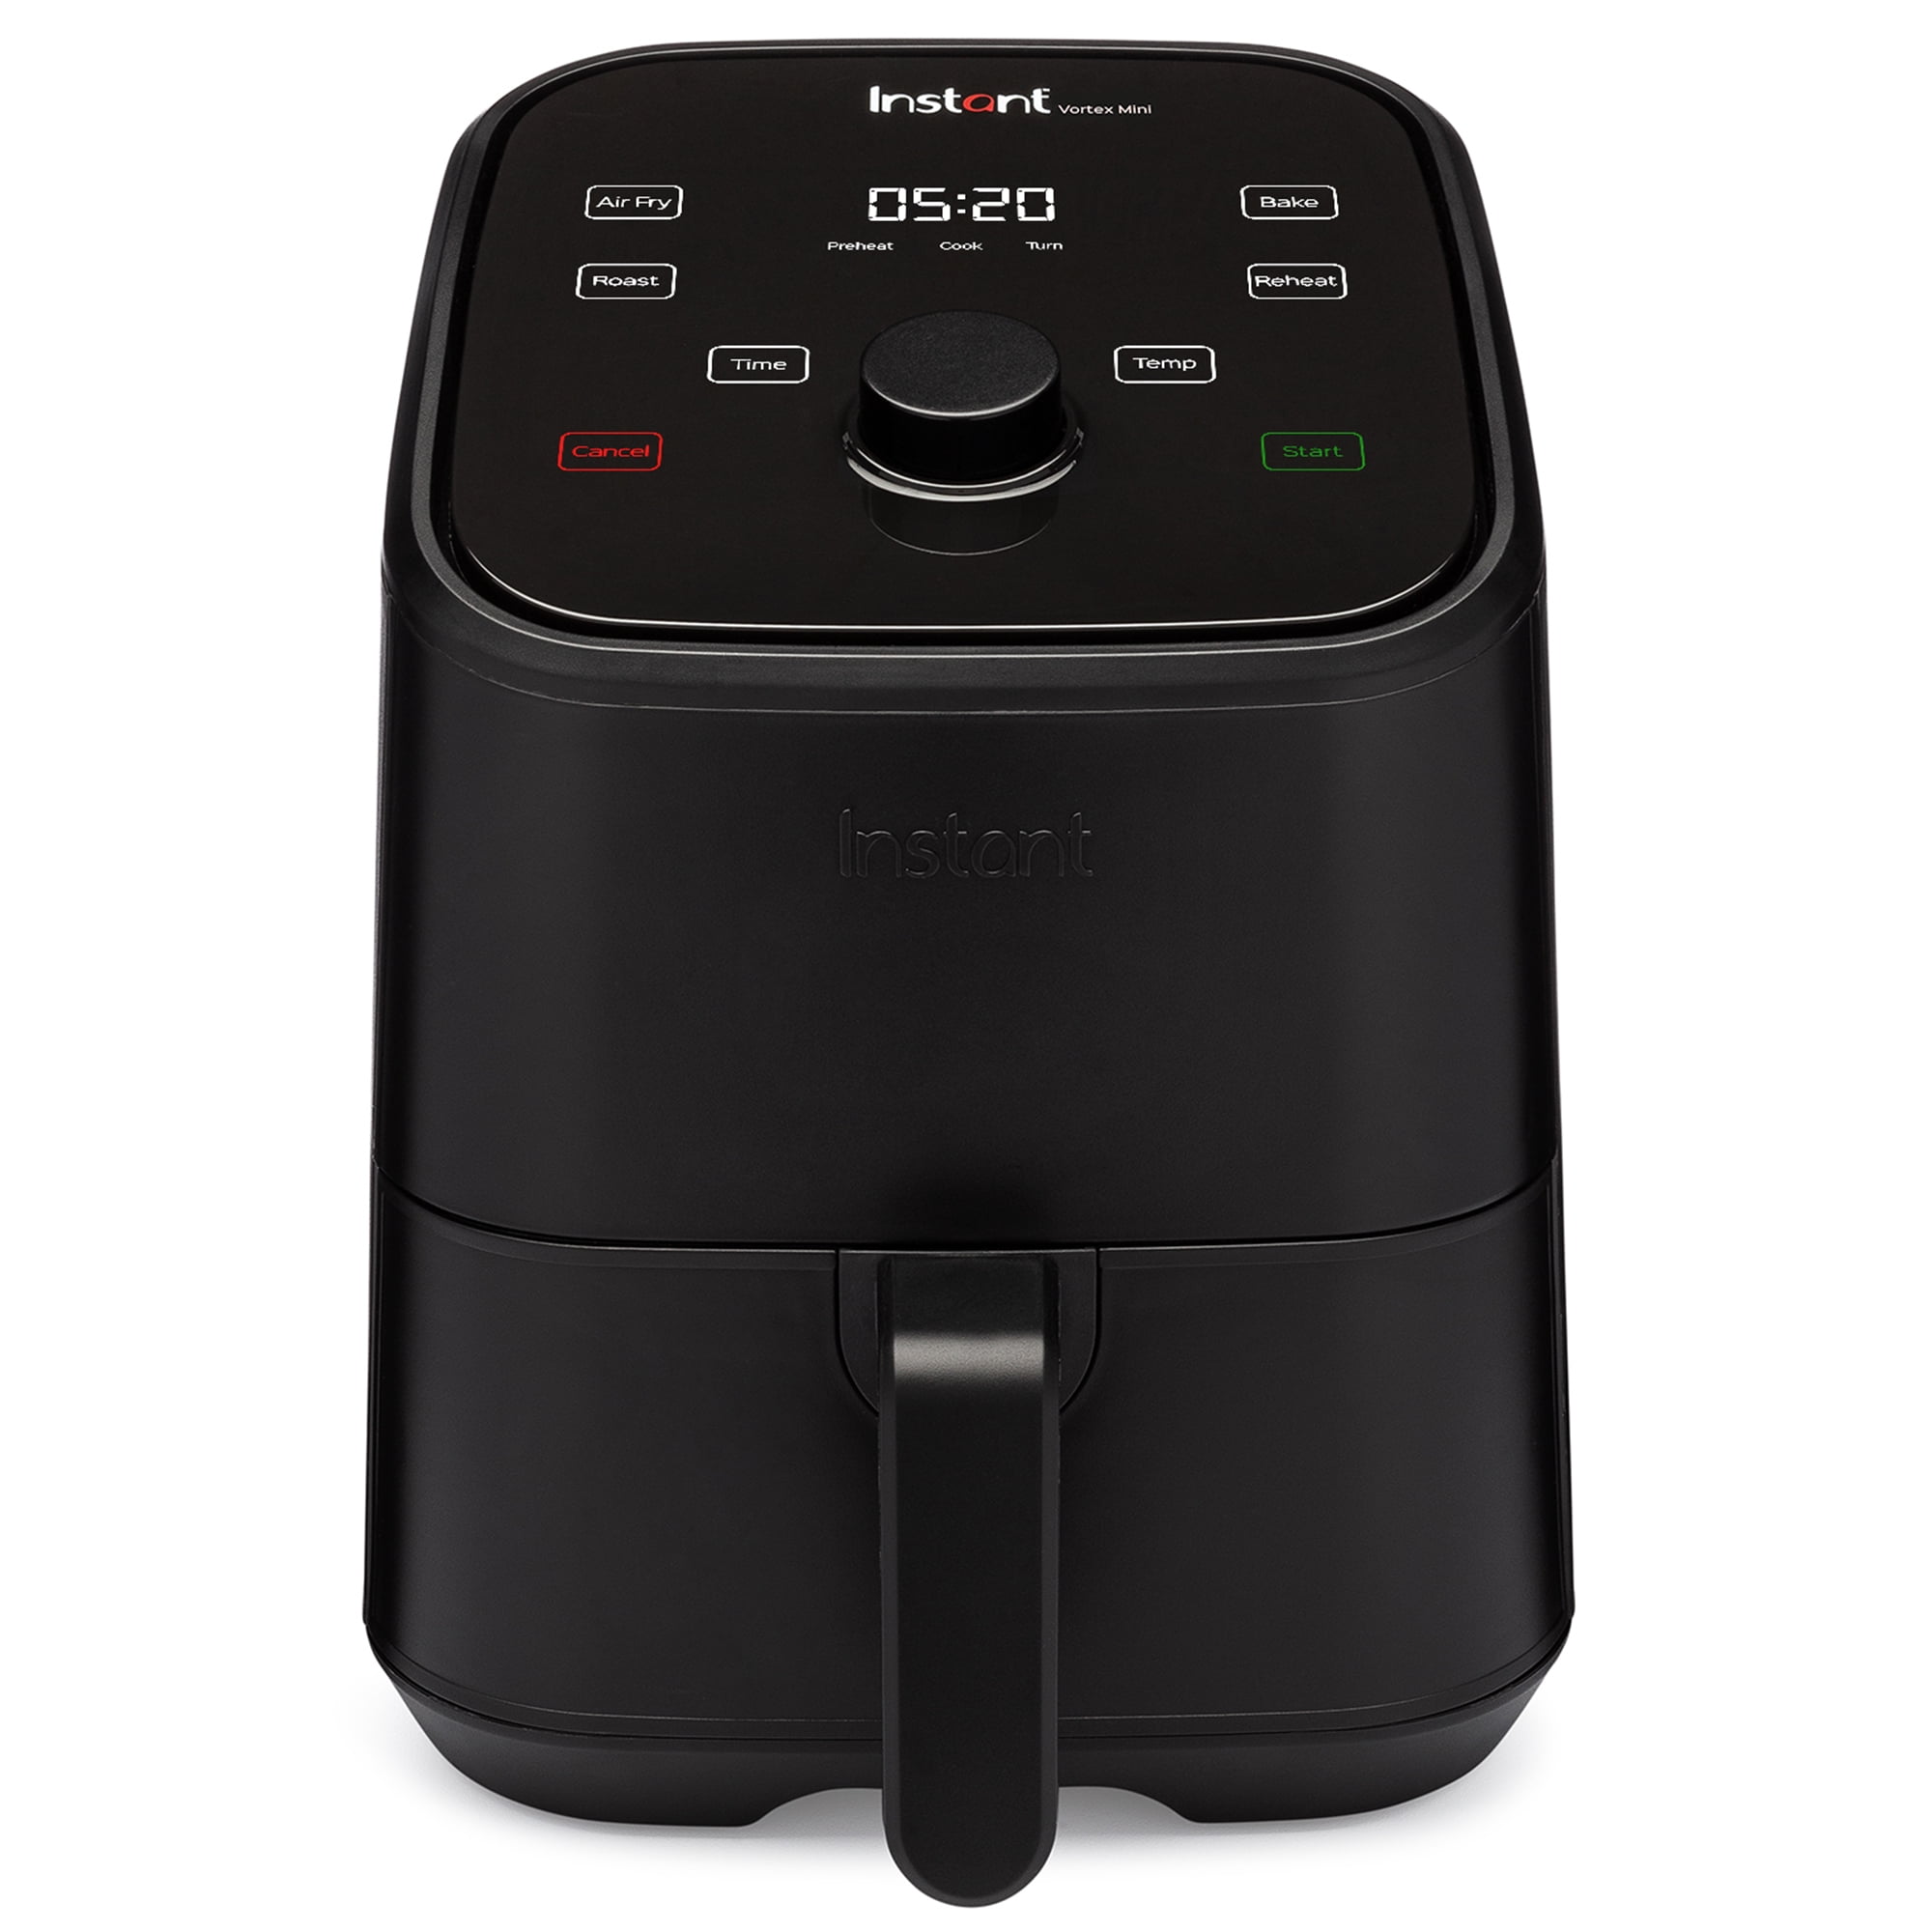  Instant Pot 6 Quart Air Fryer Oven, 4-in-1 Functions, From the  Makers of Instant Pot, Customizable Smart Cooking Programs, Nonstick and  Dishwasher-Safe Basket, App With Over 100 Recipes : Home 